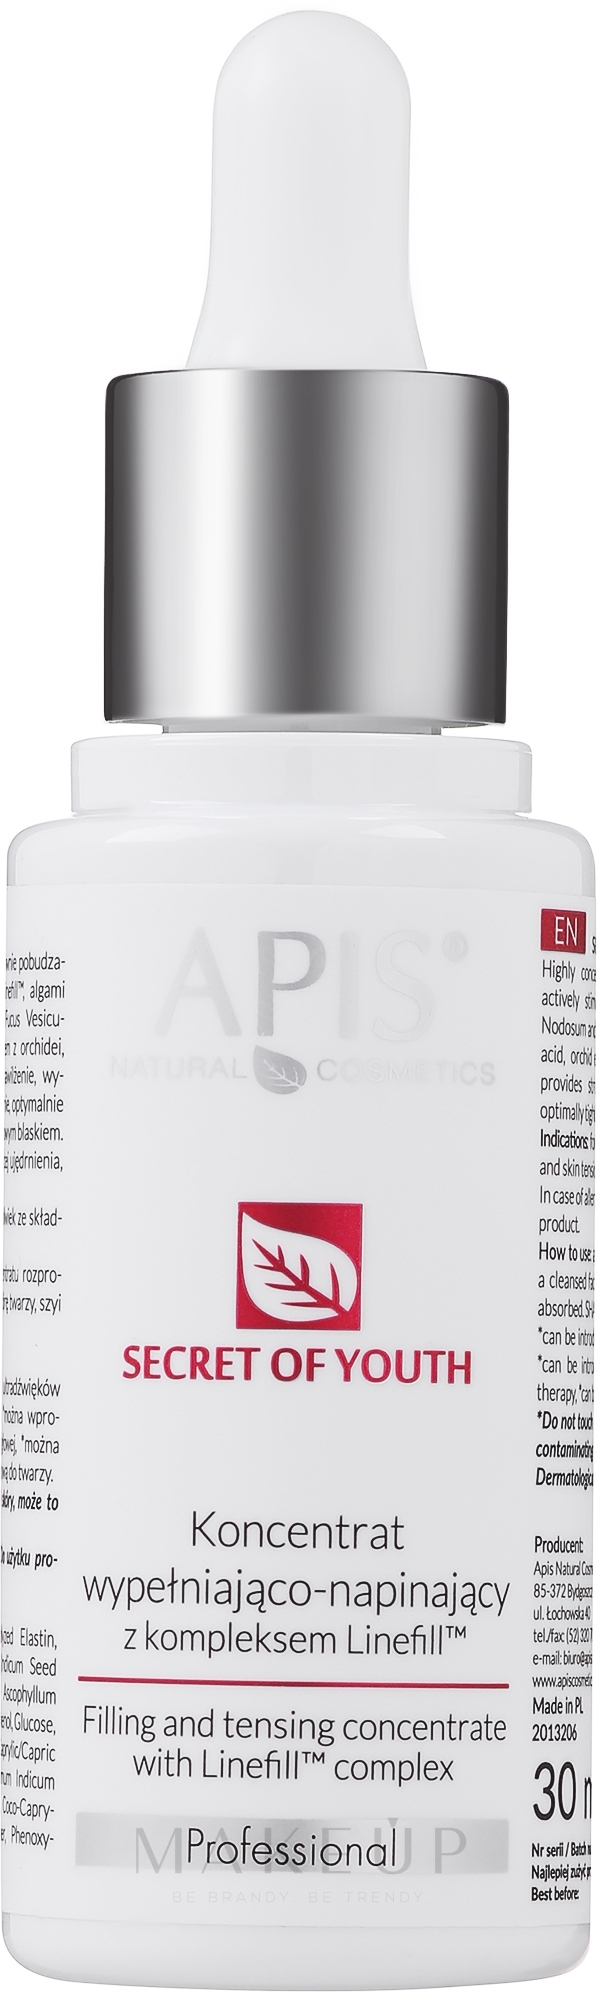 Anti-Falten Gesichtskonzentrat mit Linefill-Komplex - APIS Professional Secret Of Youth Filling And Tensing Concentrate With Linefill Tm Formula — Bild 30 ml